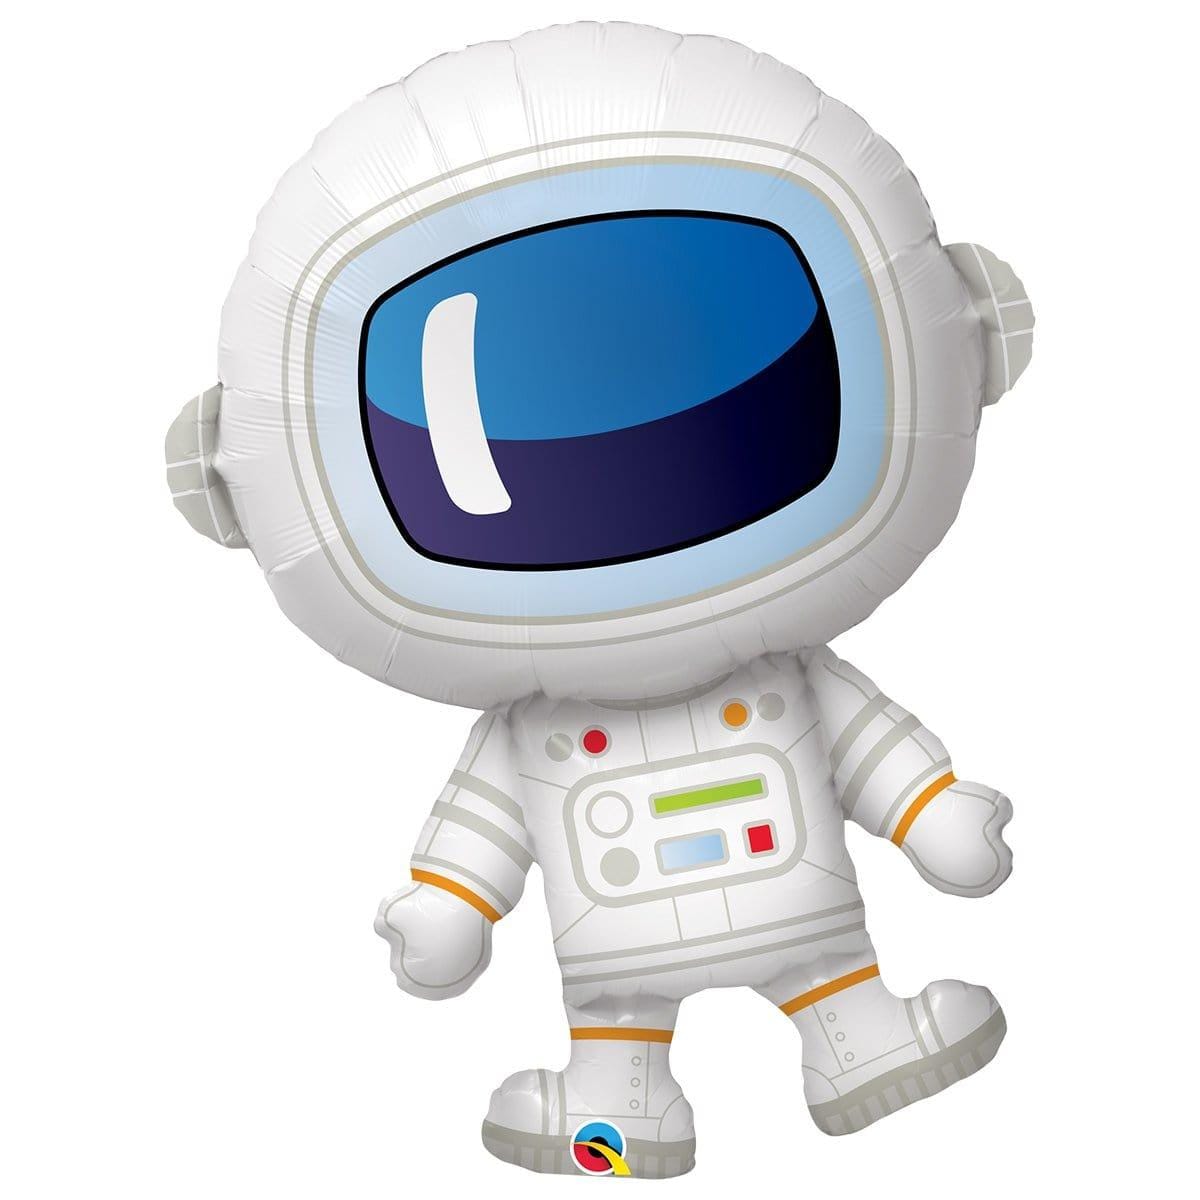 Buy Balloons Astronaut Supershape Balloon sold at Party Expert